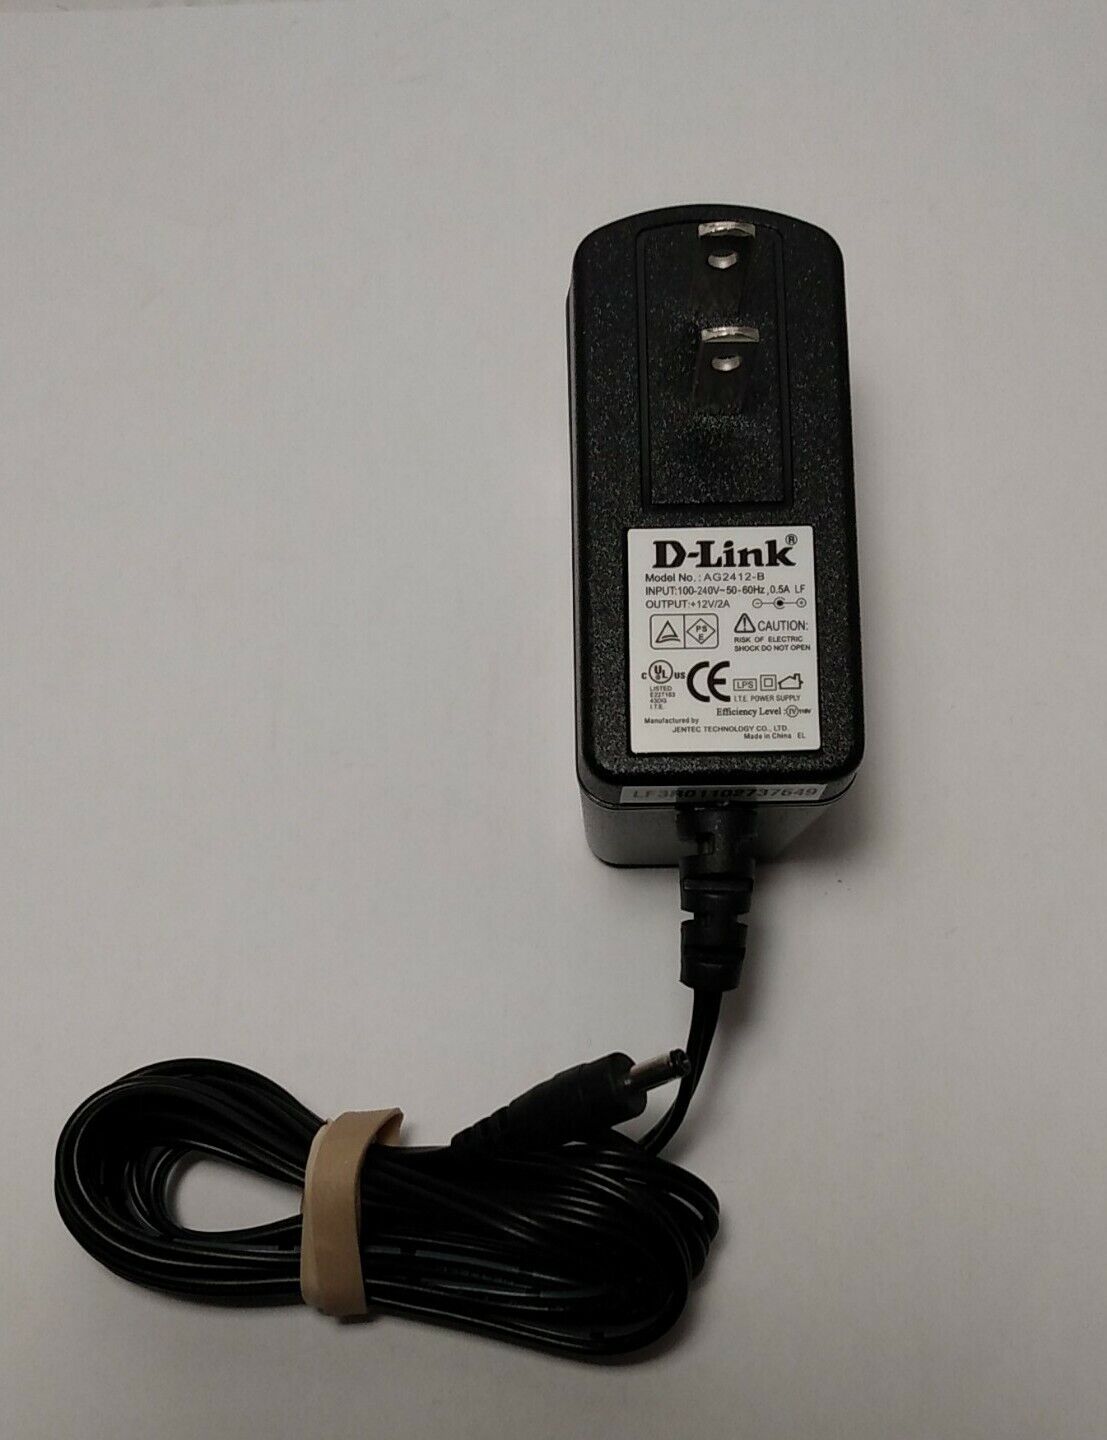 Genuine D-Link JENTEC AG2412-B AC/DC Power Supply Adapter Output 12V 2A (Tested) Brand: JECTEC Type: AC/DC Adapter